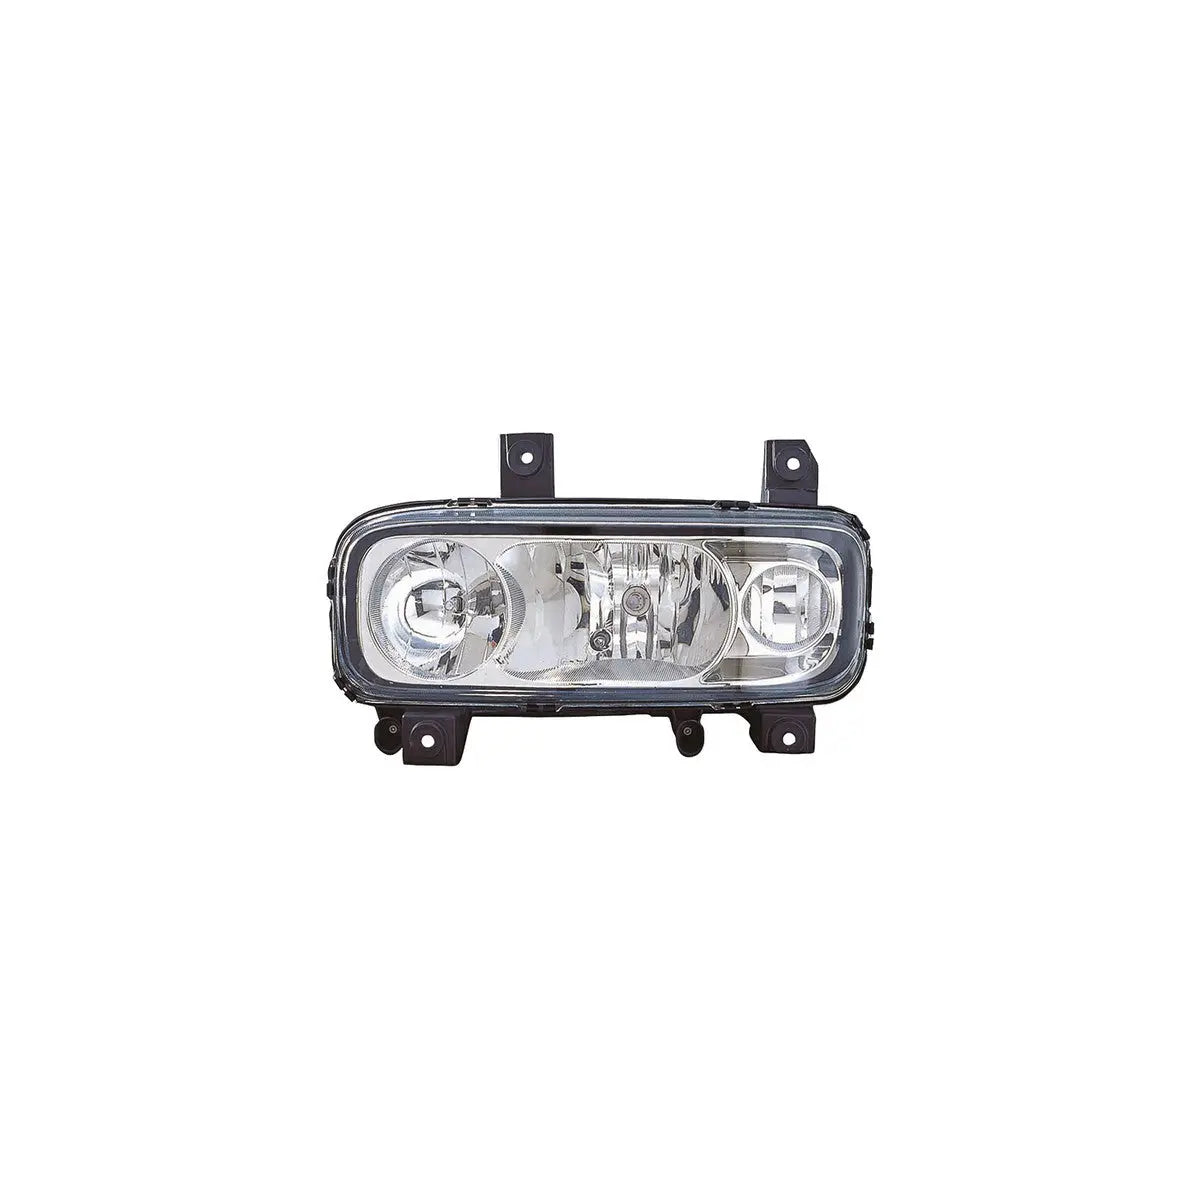 CHINA Factory Wholesale 9738202261 9738202461S A9738202261 A9738202461S Head Lamp Left For MERCEDES  BENZ FANCHANTS China Auto Parts Wholesales